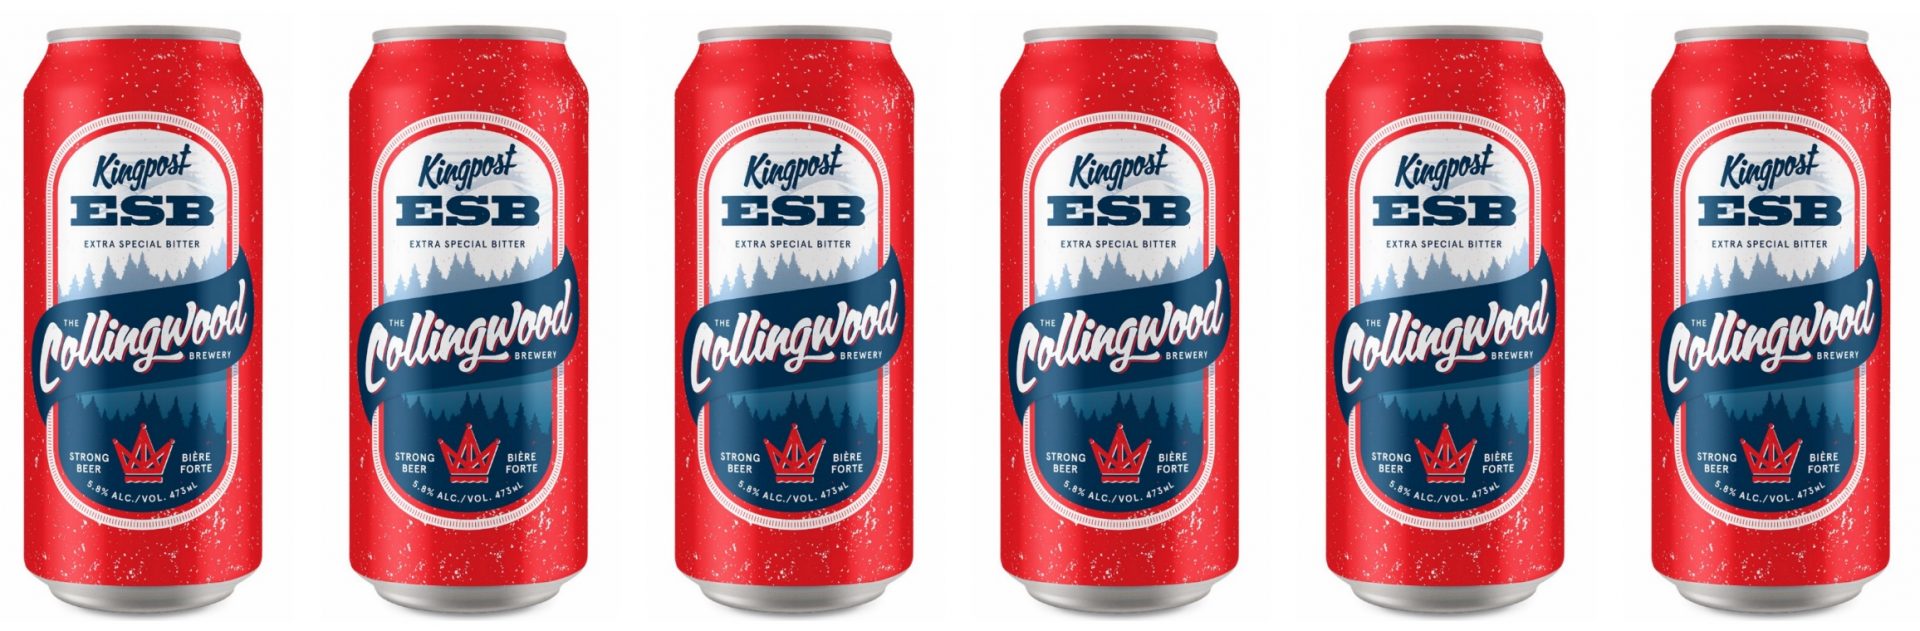 Try This : Collingwood Brewery’s Kingpost ESB